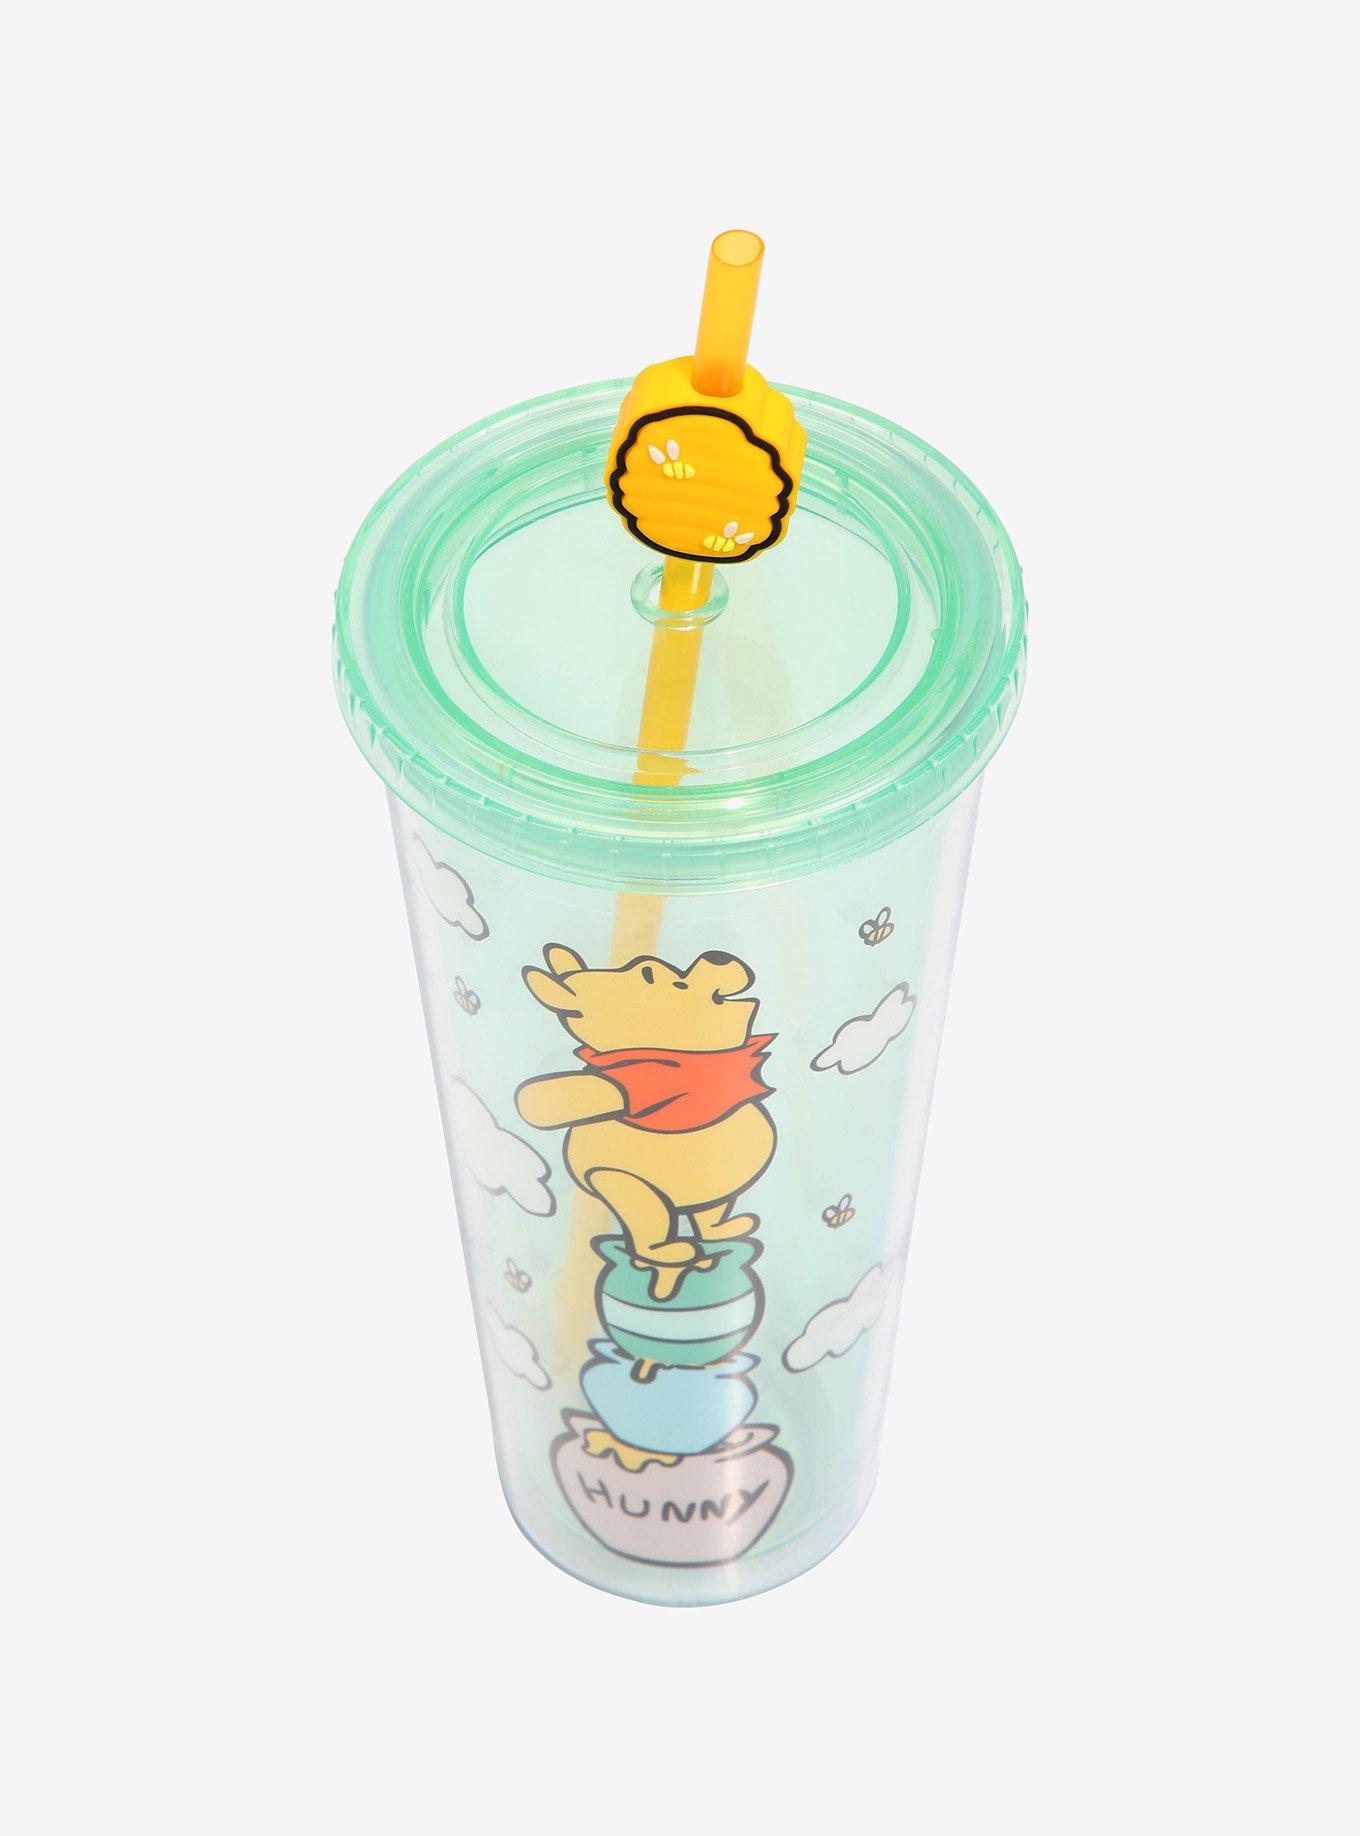 Disney Winnie the Pooh Hunny Pot Carnival Cup With Lid and Straw